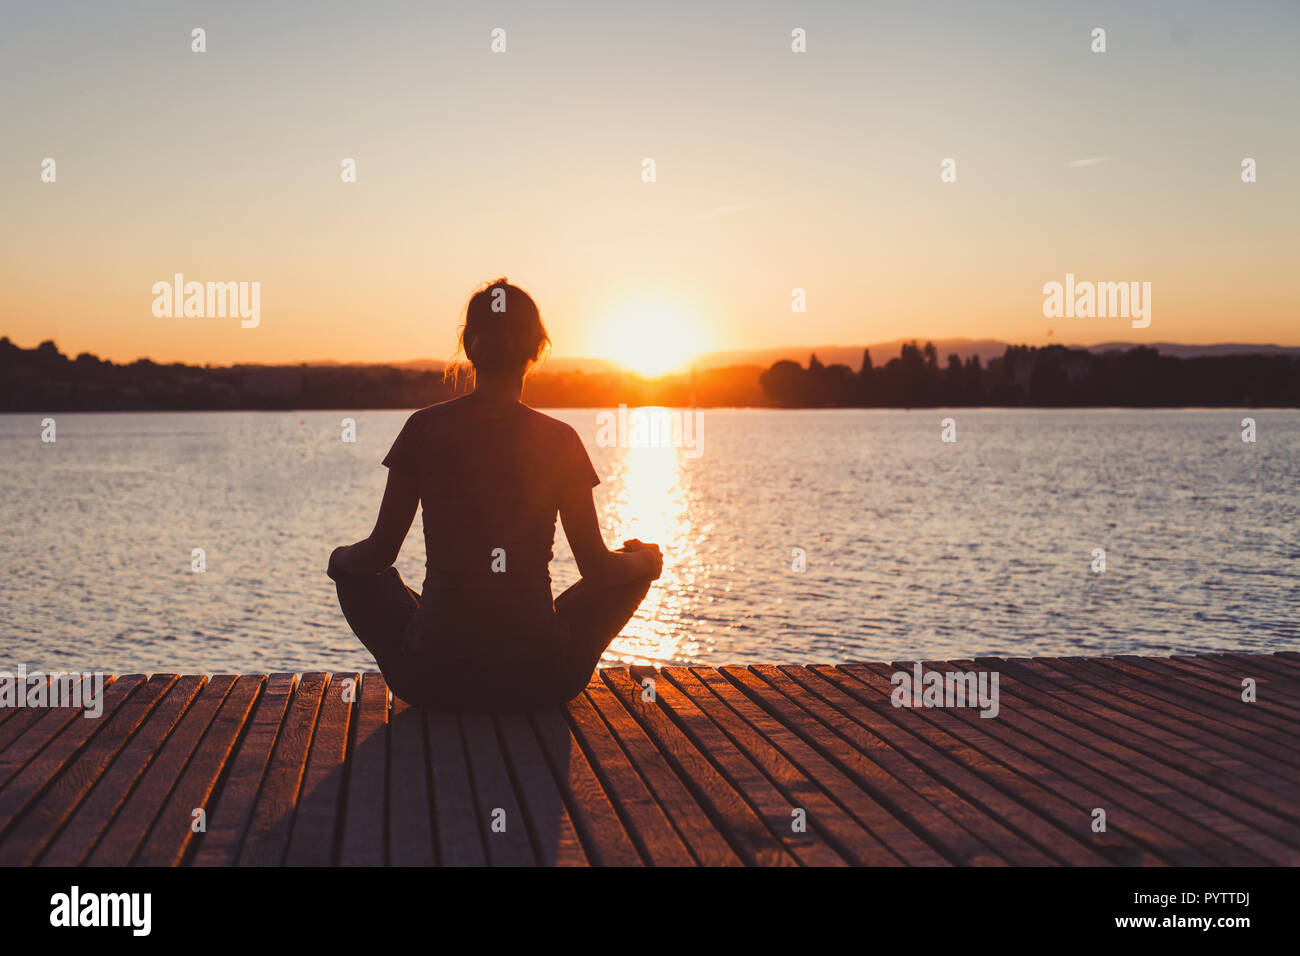 yoga, woman doing meditation and breathing exercises on wooden pier near lake, silhouette at sunset Stock Photo